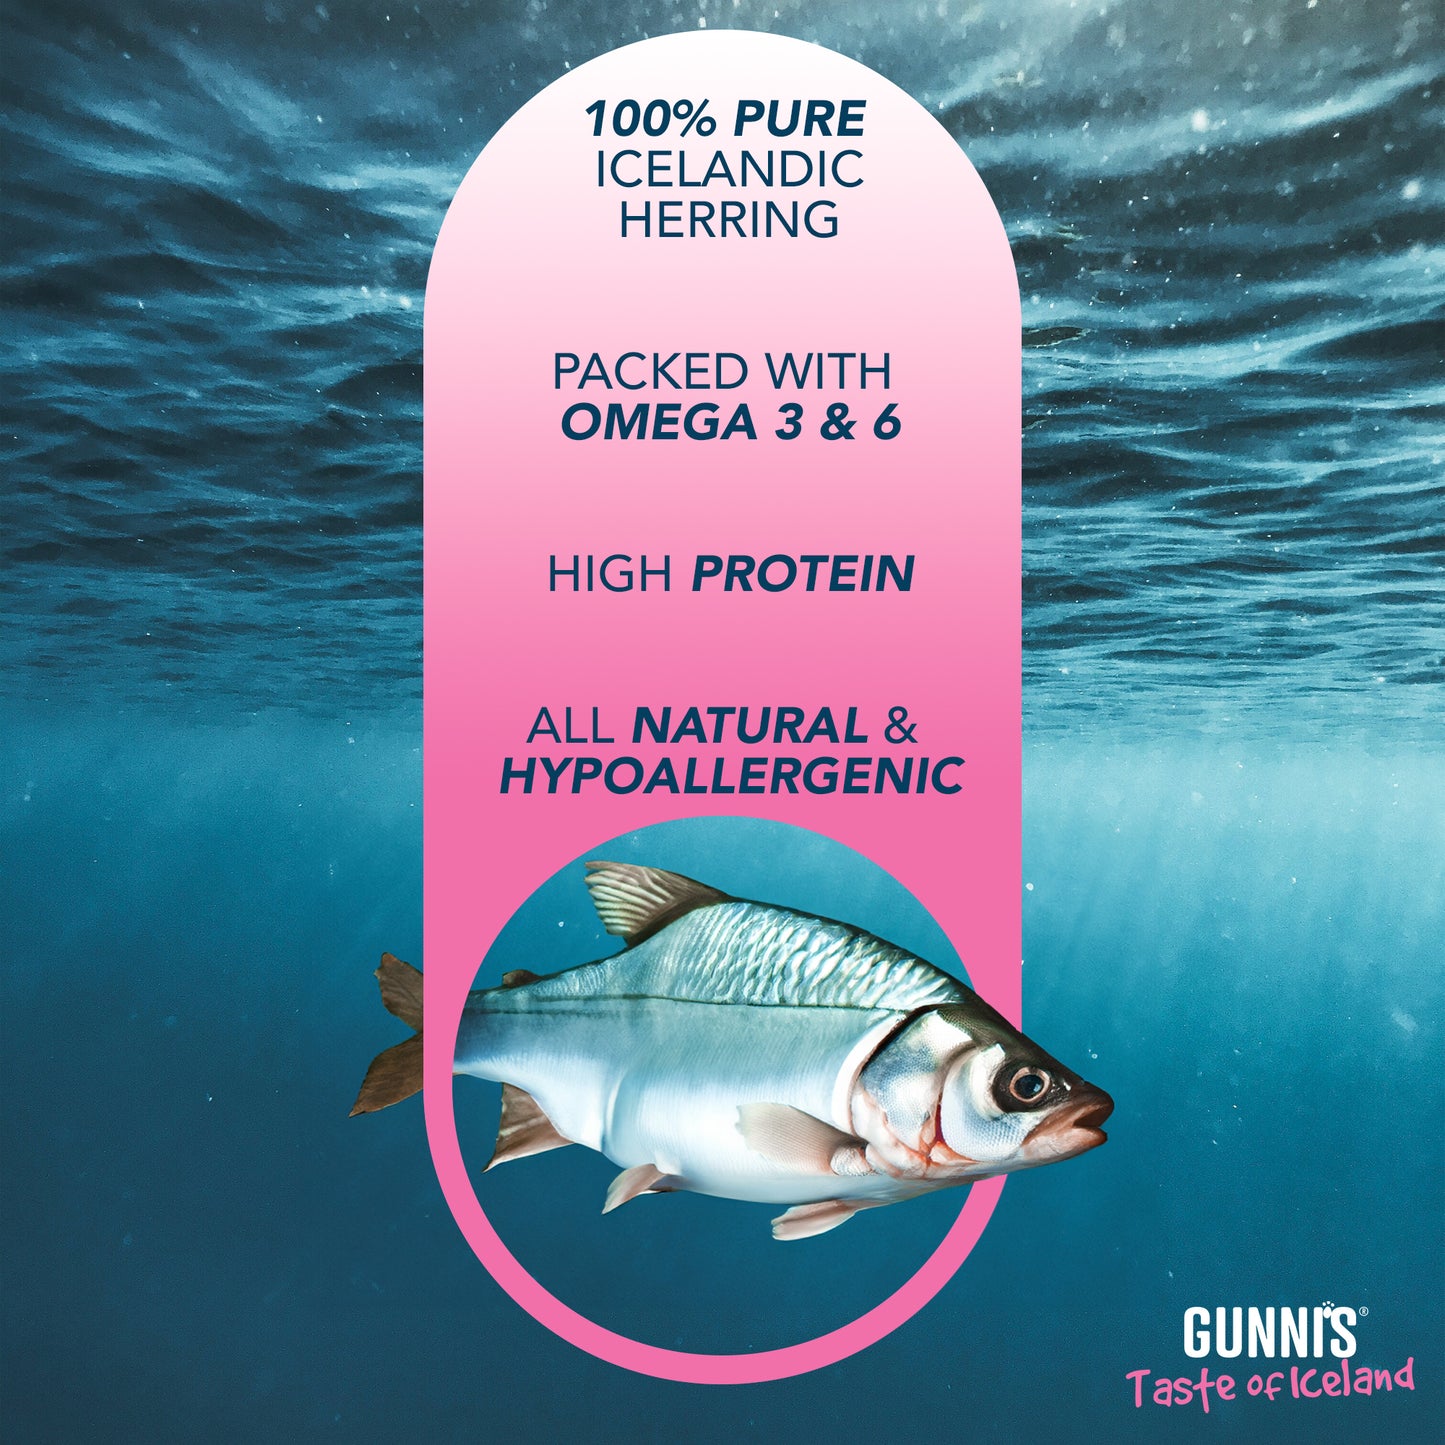 Gunnis Whole Herring Natural Fish Treats For Dogs, 85g